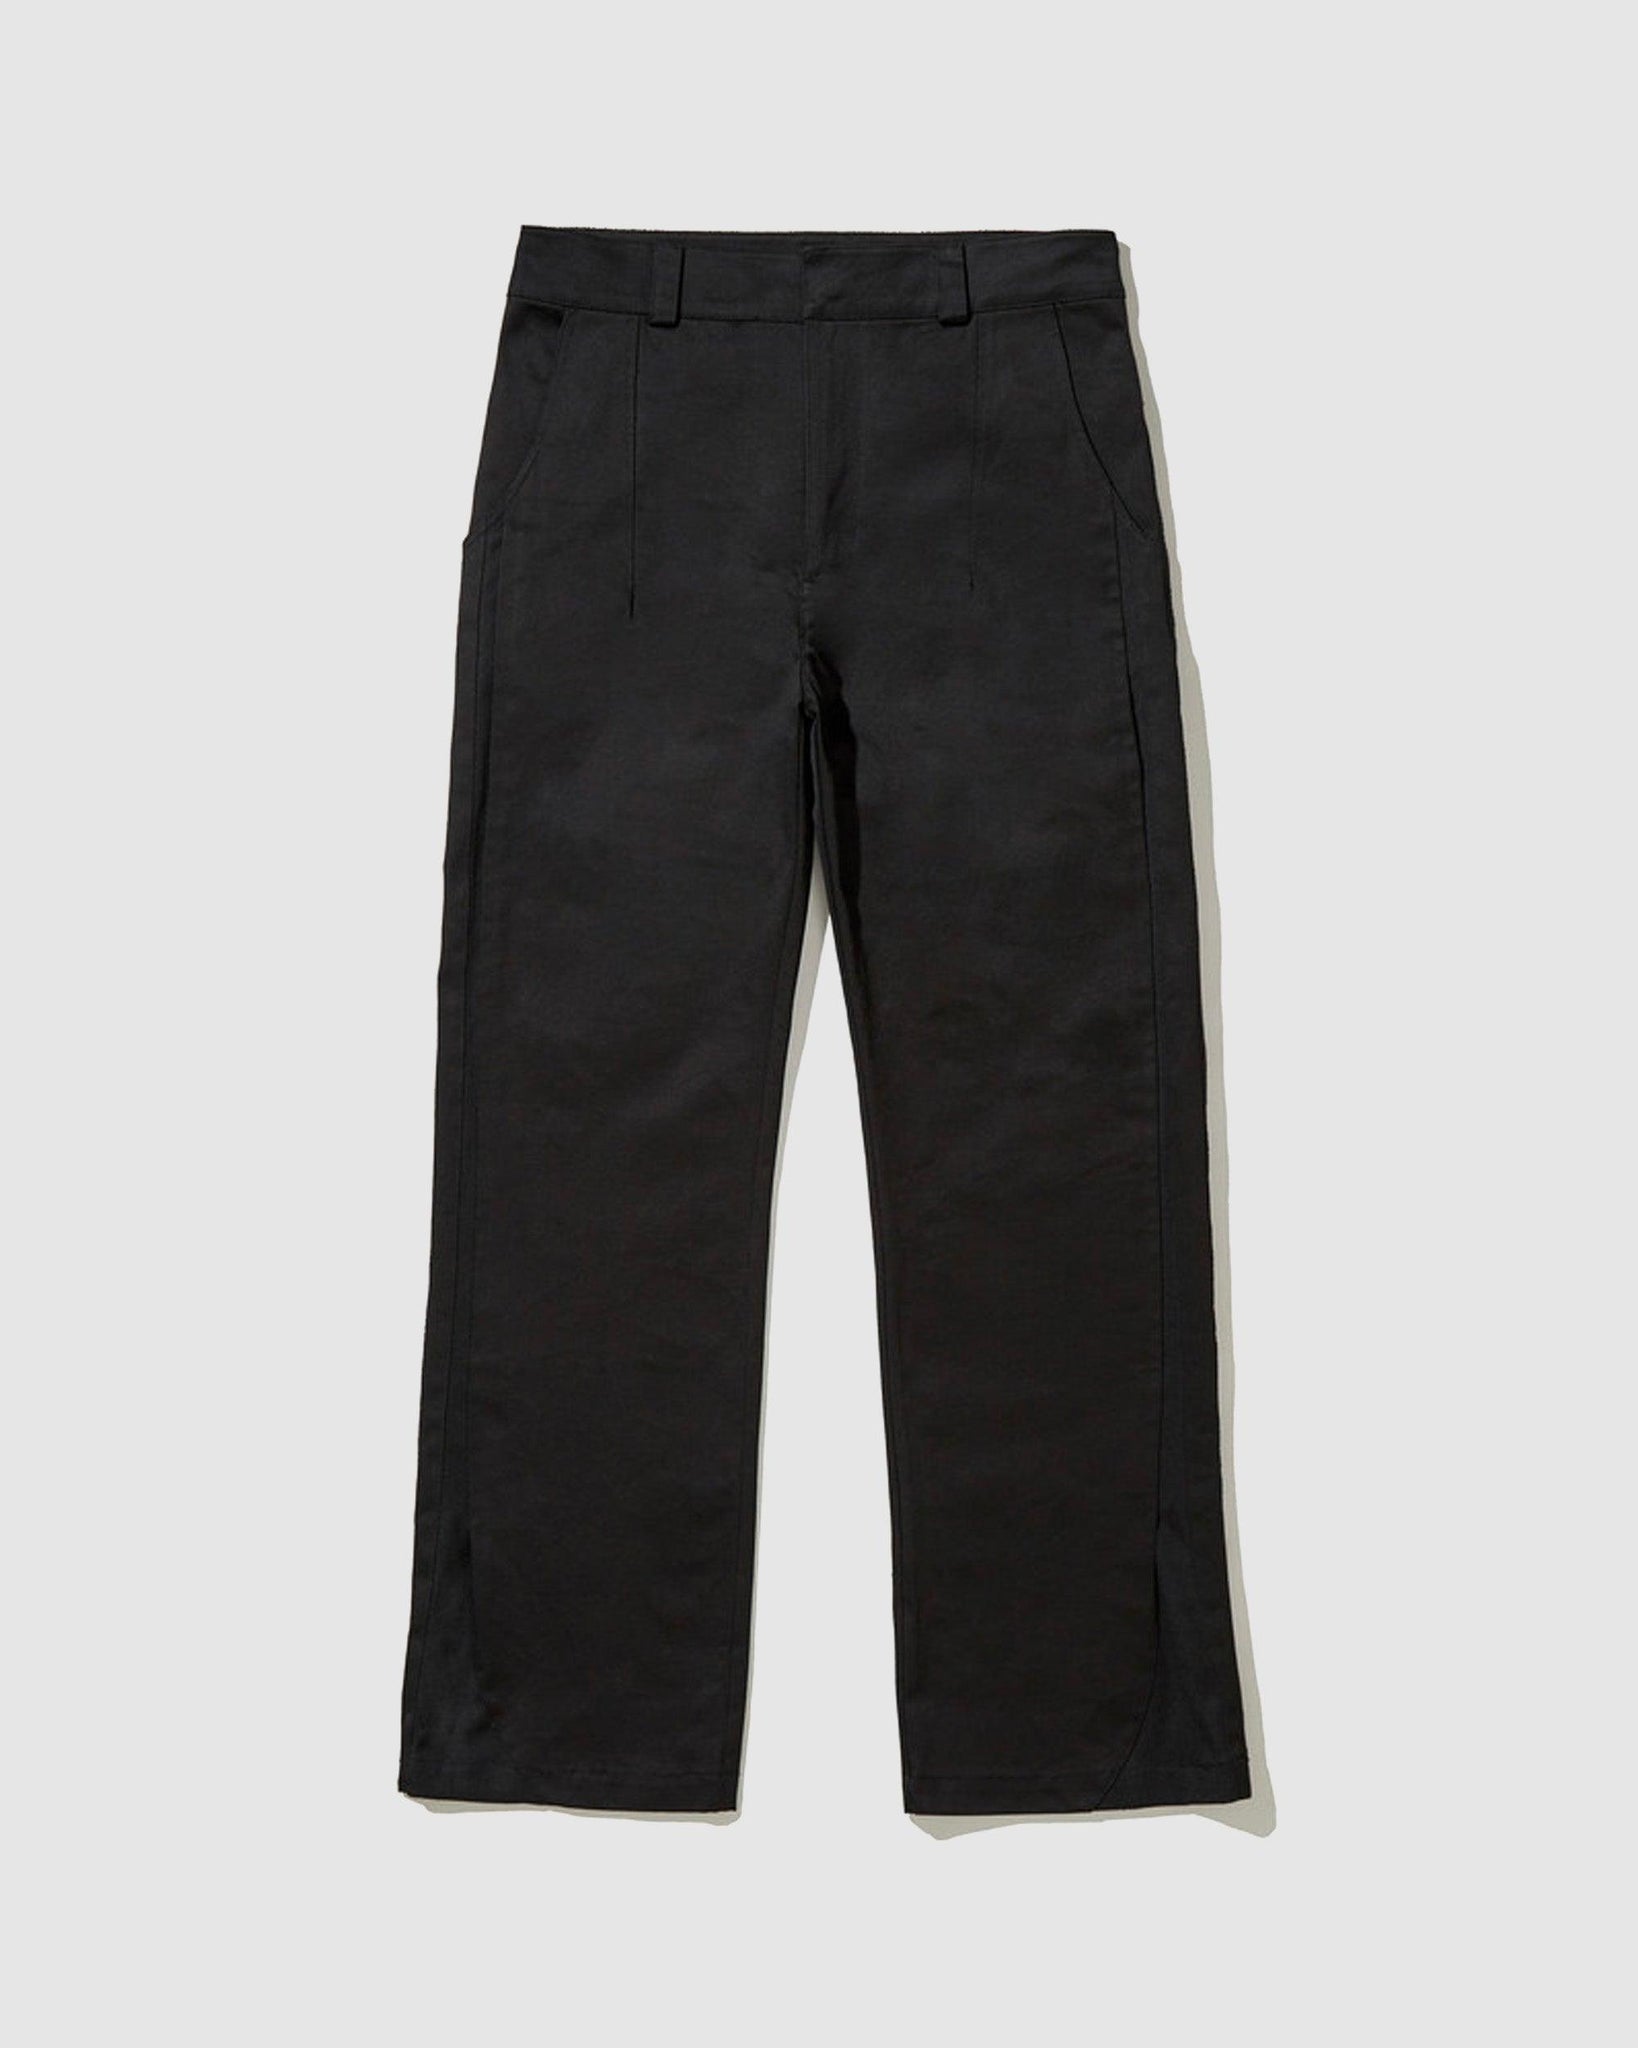 03 Trouser Black - {{ collection.title }} - Chinatown Country Club 